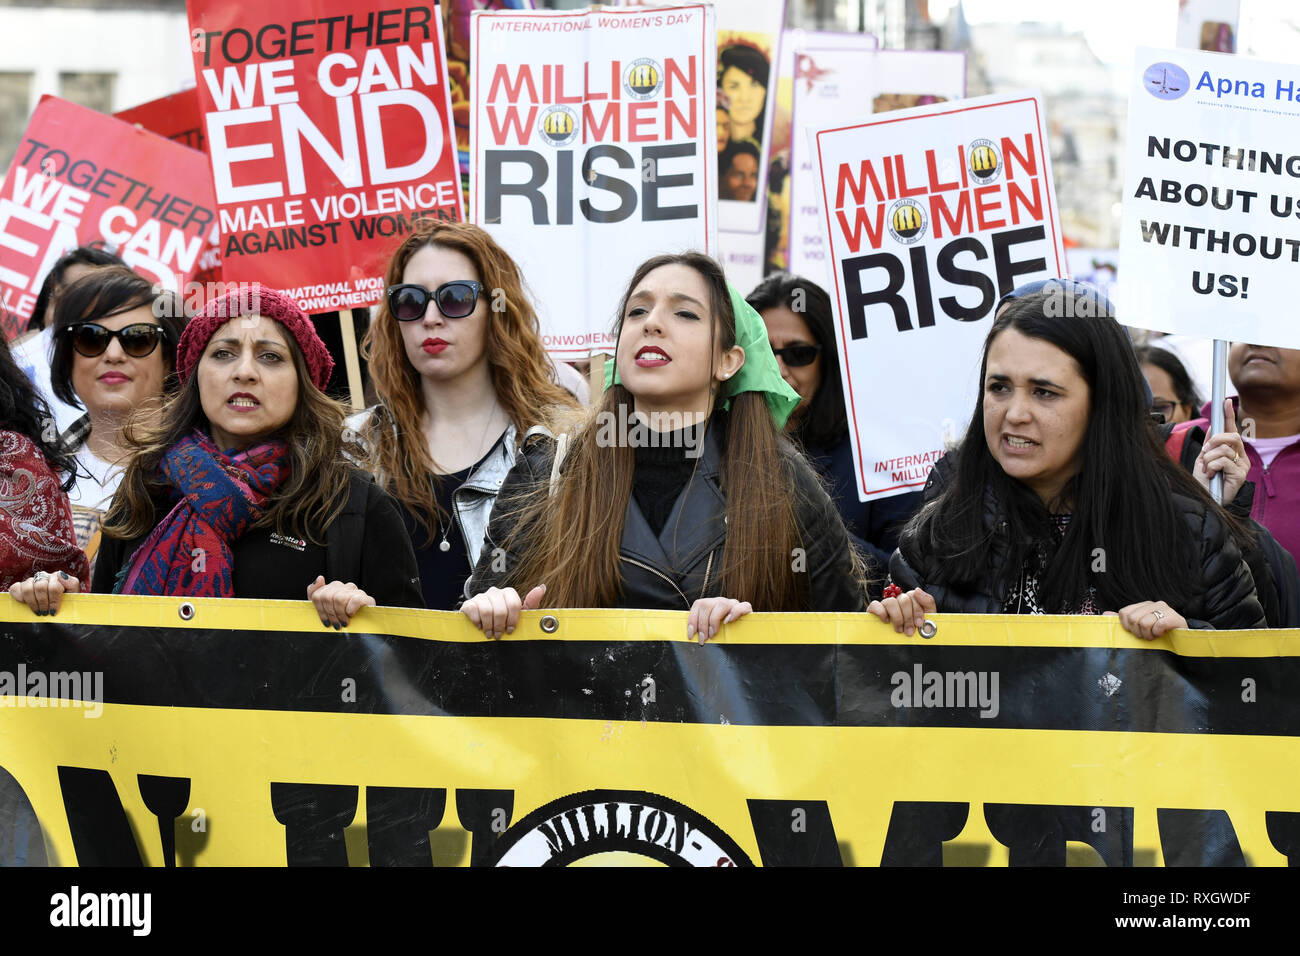 London, Greater London, UK. 9th Mar, 2019. A large banner seen at the front of the march during the Million women's rise march in London.Thousands of women marched through central London to a rally in Trafalgar Square in London demanding freedom and justice and the end of male violence against them. ''˜Never Forgotten' was the theme for this year's march and participants commemorated the lives of girls and women who have been killed by mens's violence. Credit: Andres Pantoja/SOPA Images/ZUMA Wire/Alamy Live News Stock Photo